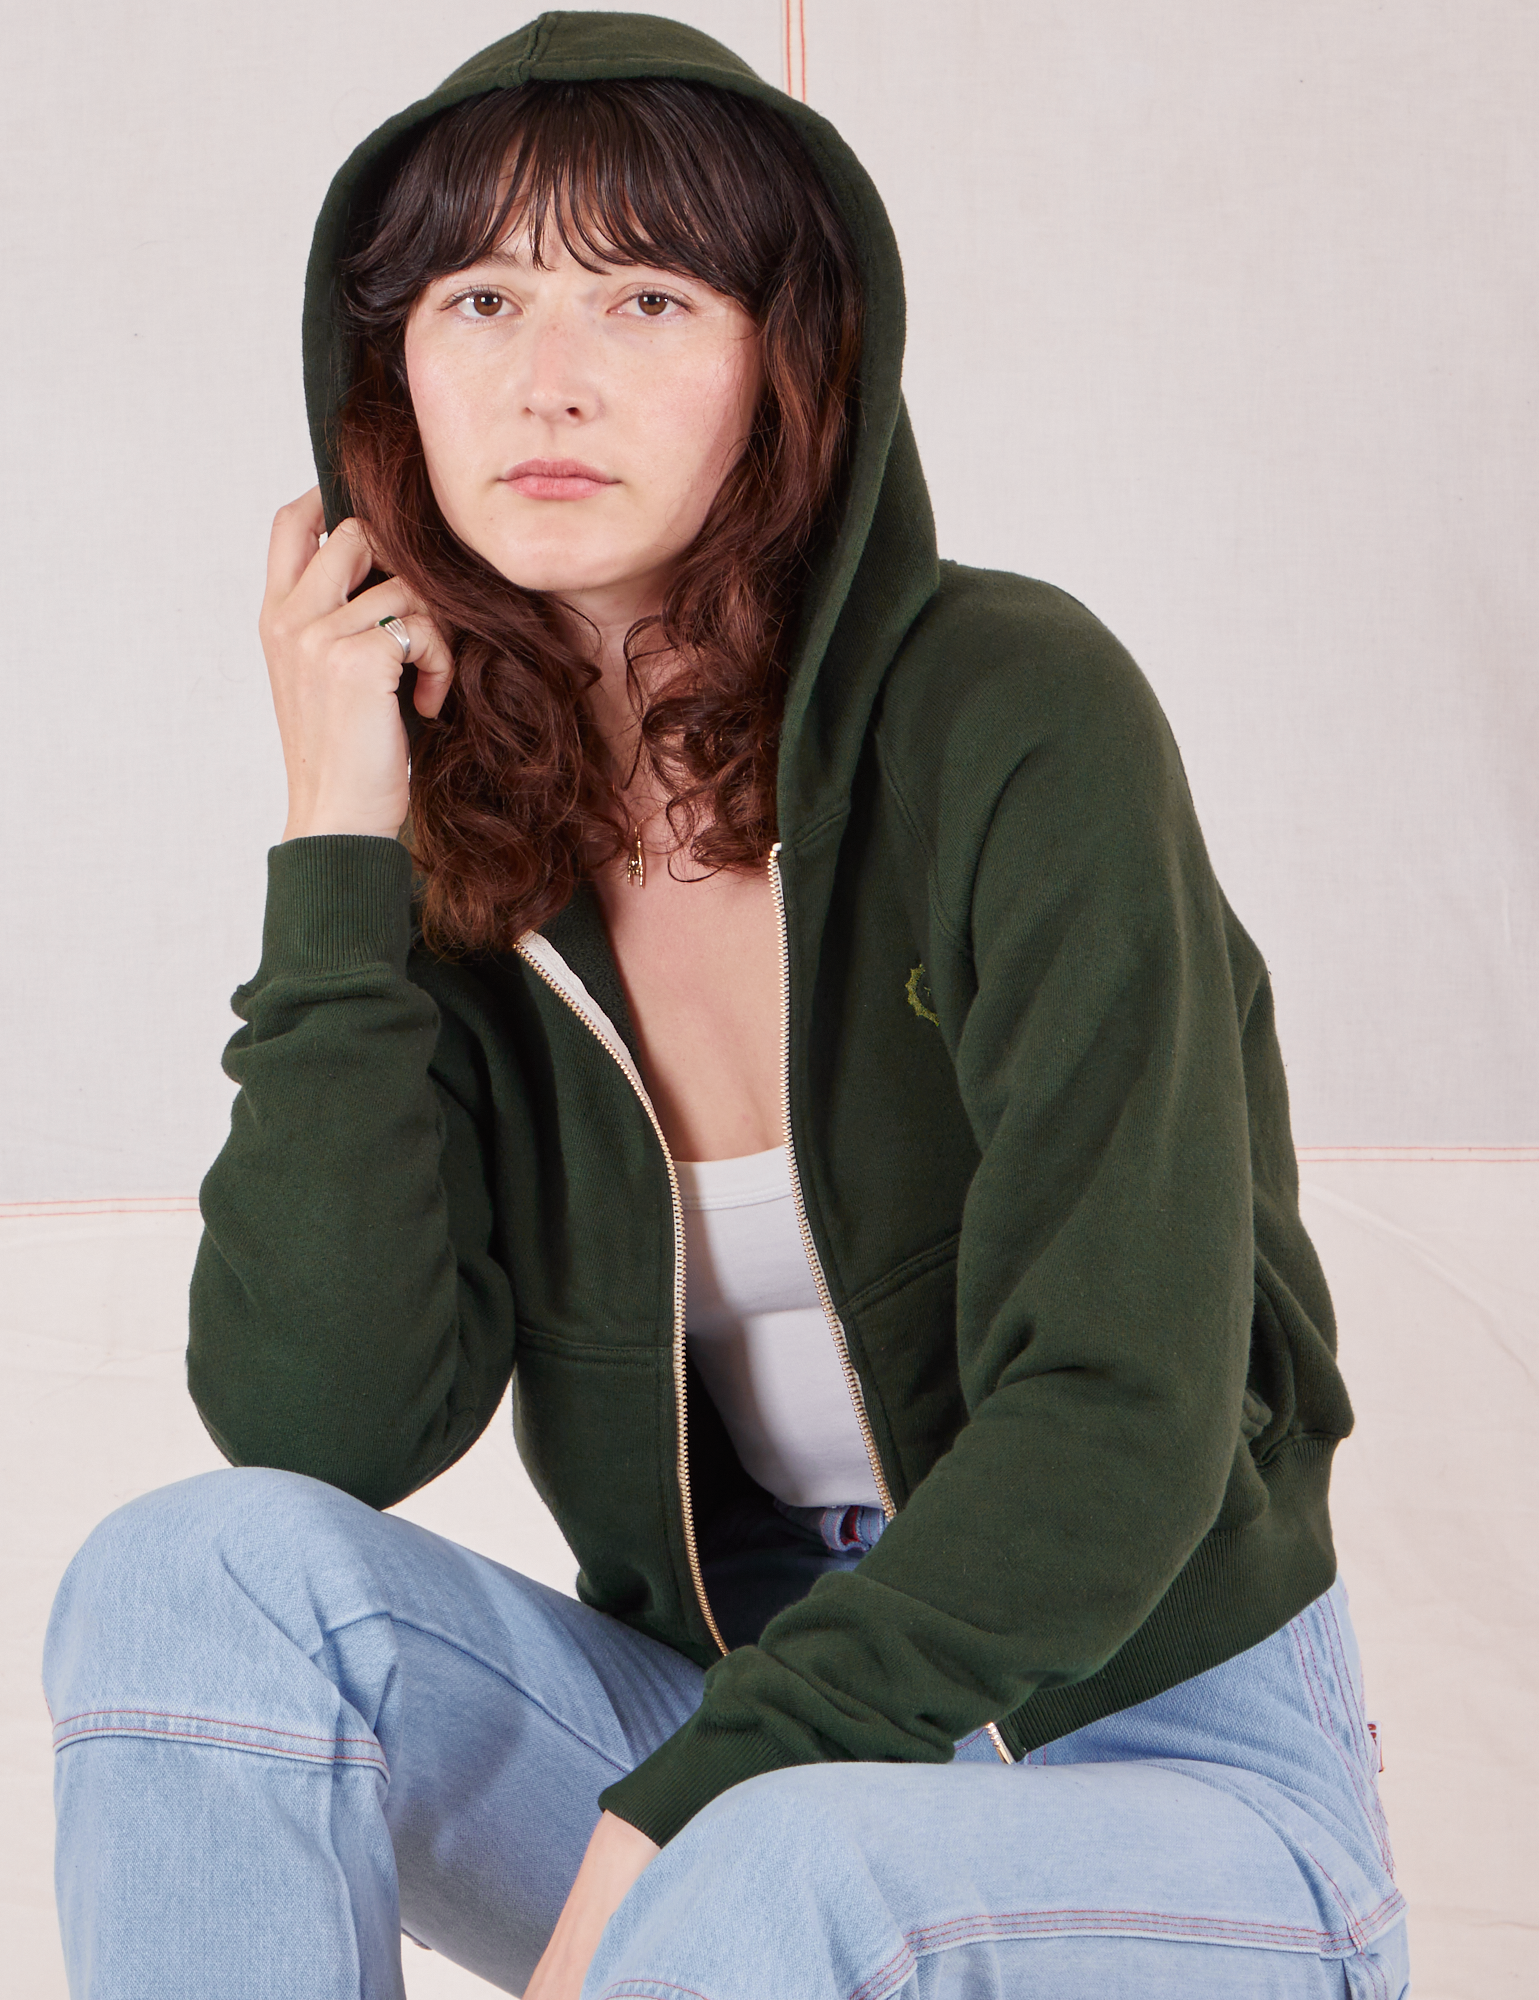 Alex is wearing Cropped Zip Hoodie in Swamp Green with the hood over her head